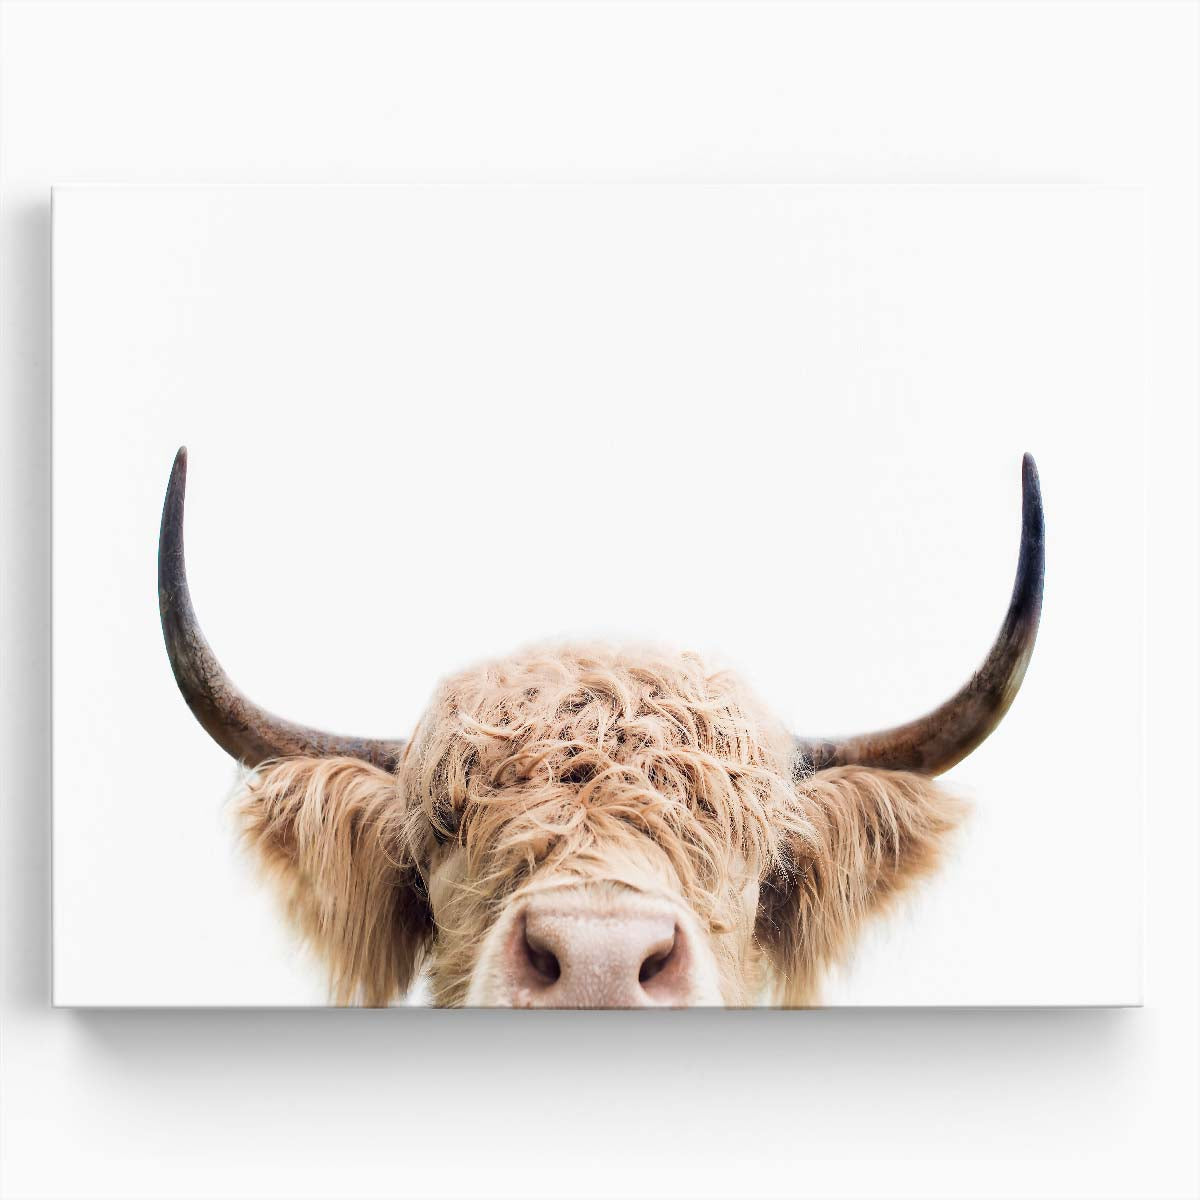 Highland Cow Close-Up Portrait - Rural Farm Photography Wall Art by Luxuriance Designs. Made in USA.